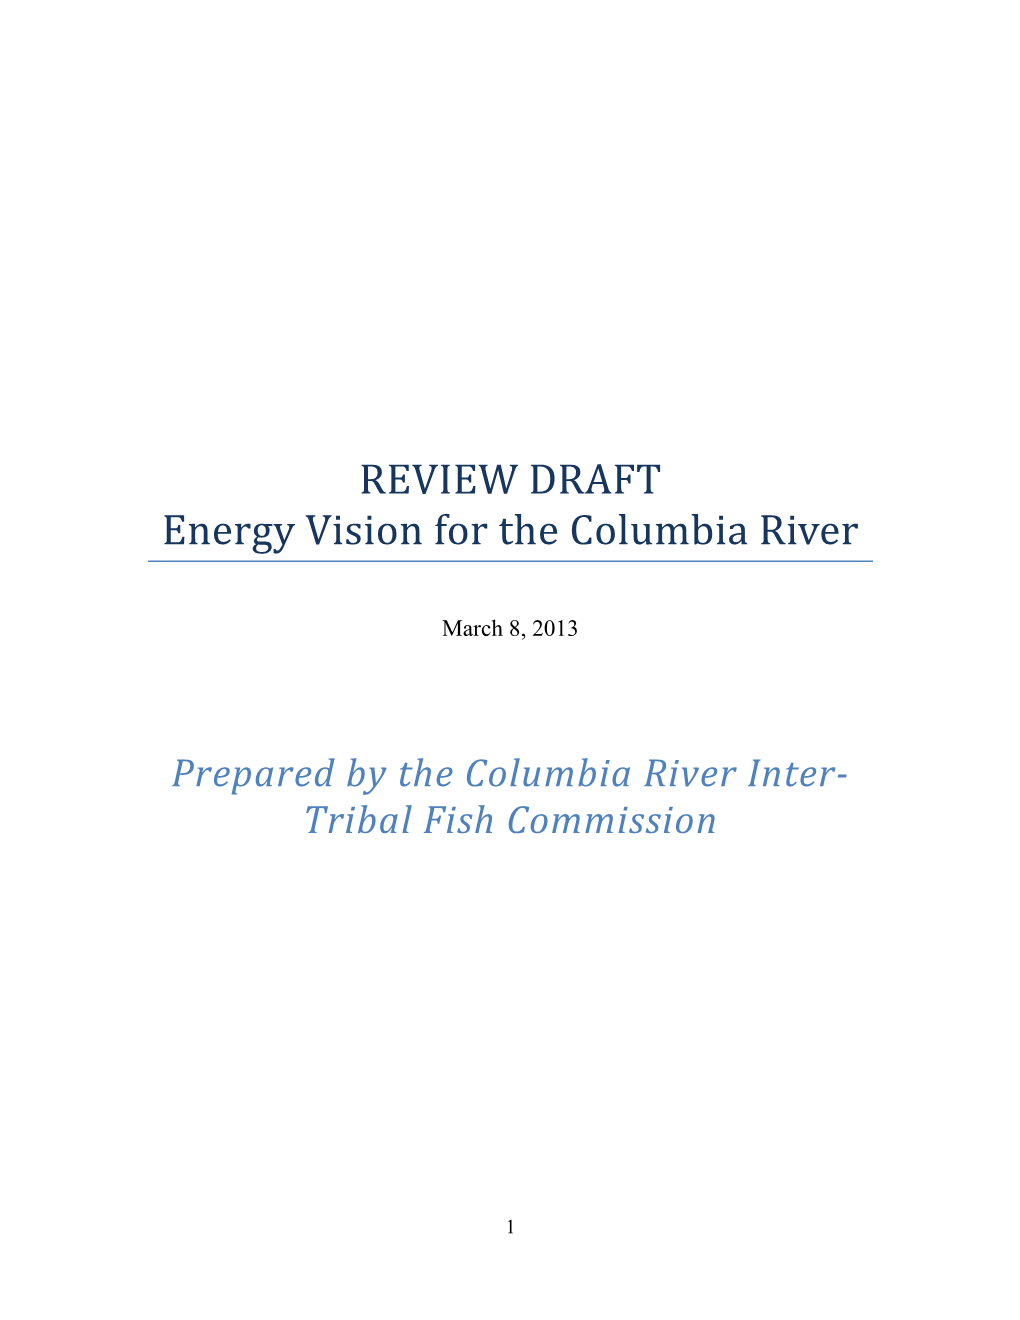 REVIEW DRAFT Energy Vision for the Columbia River